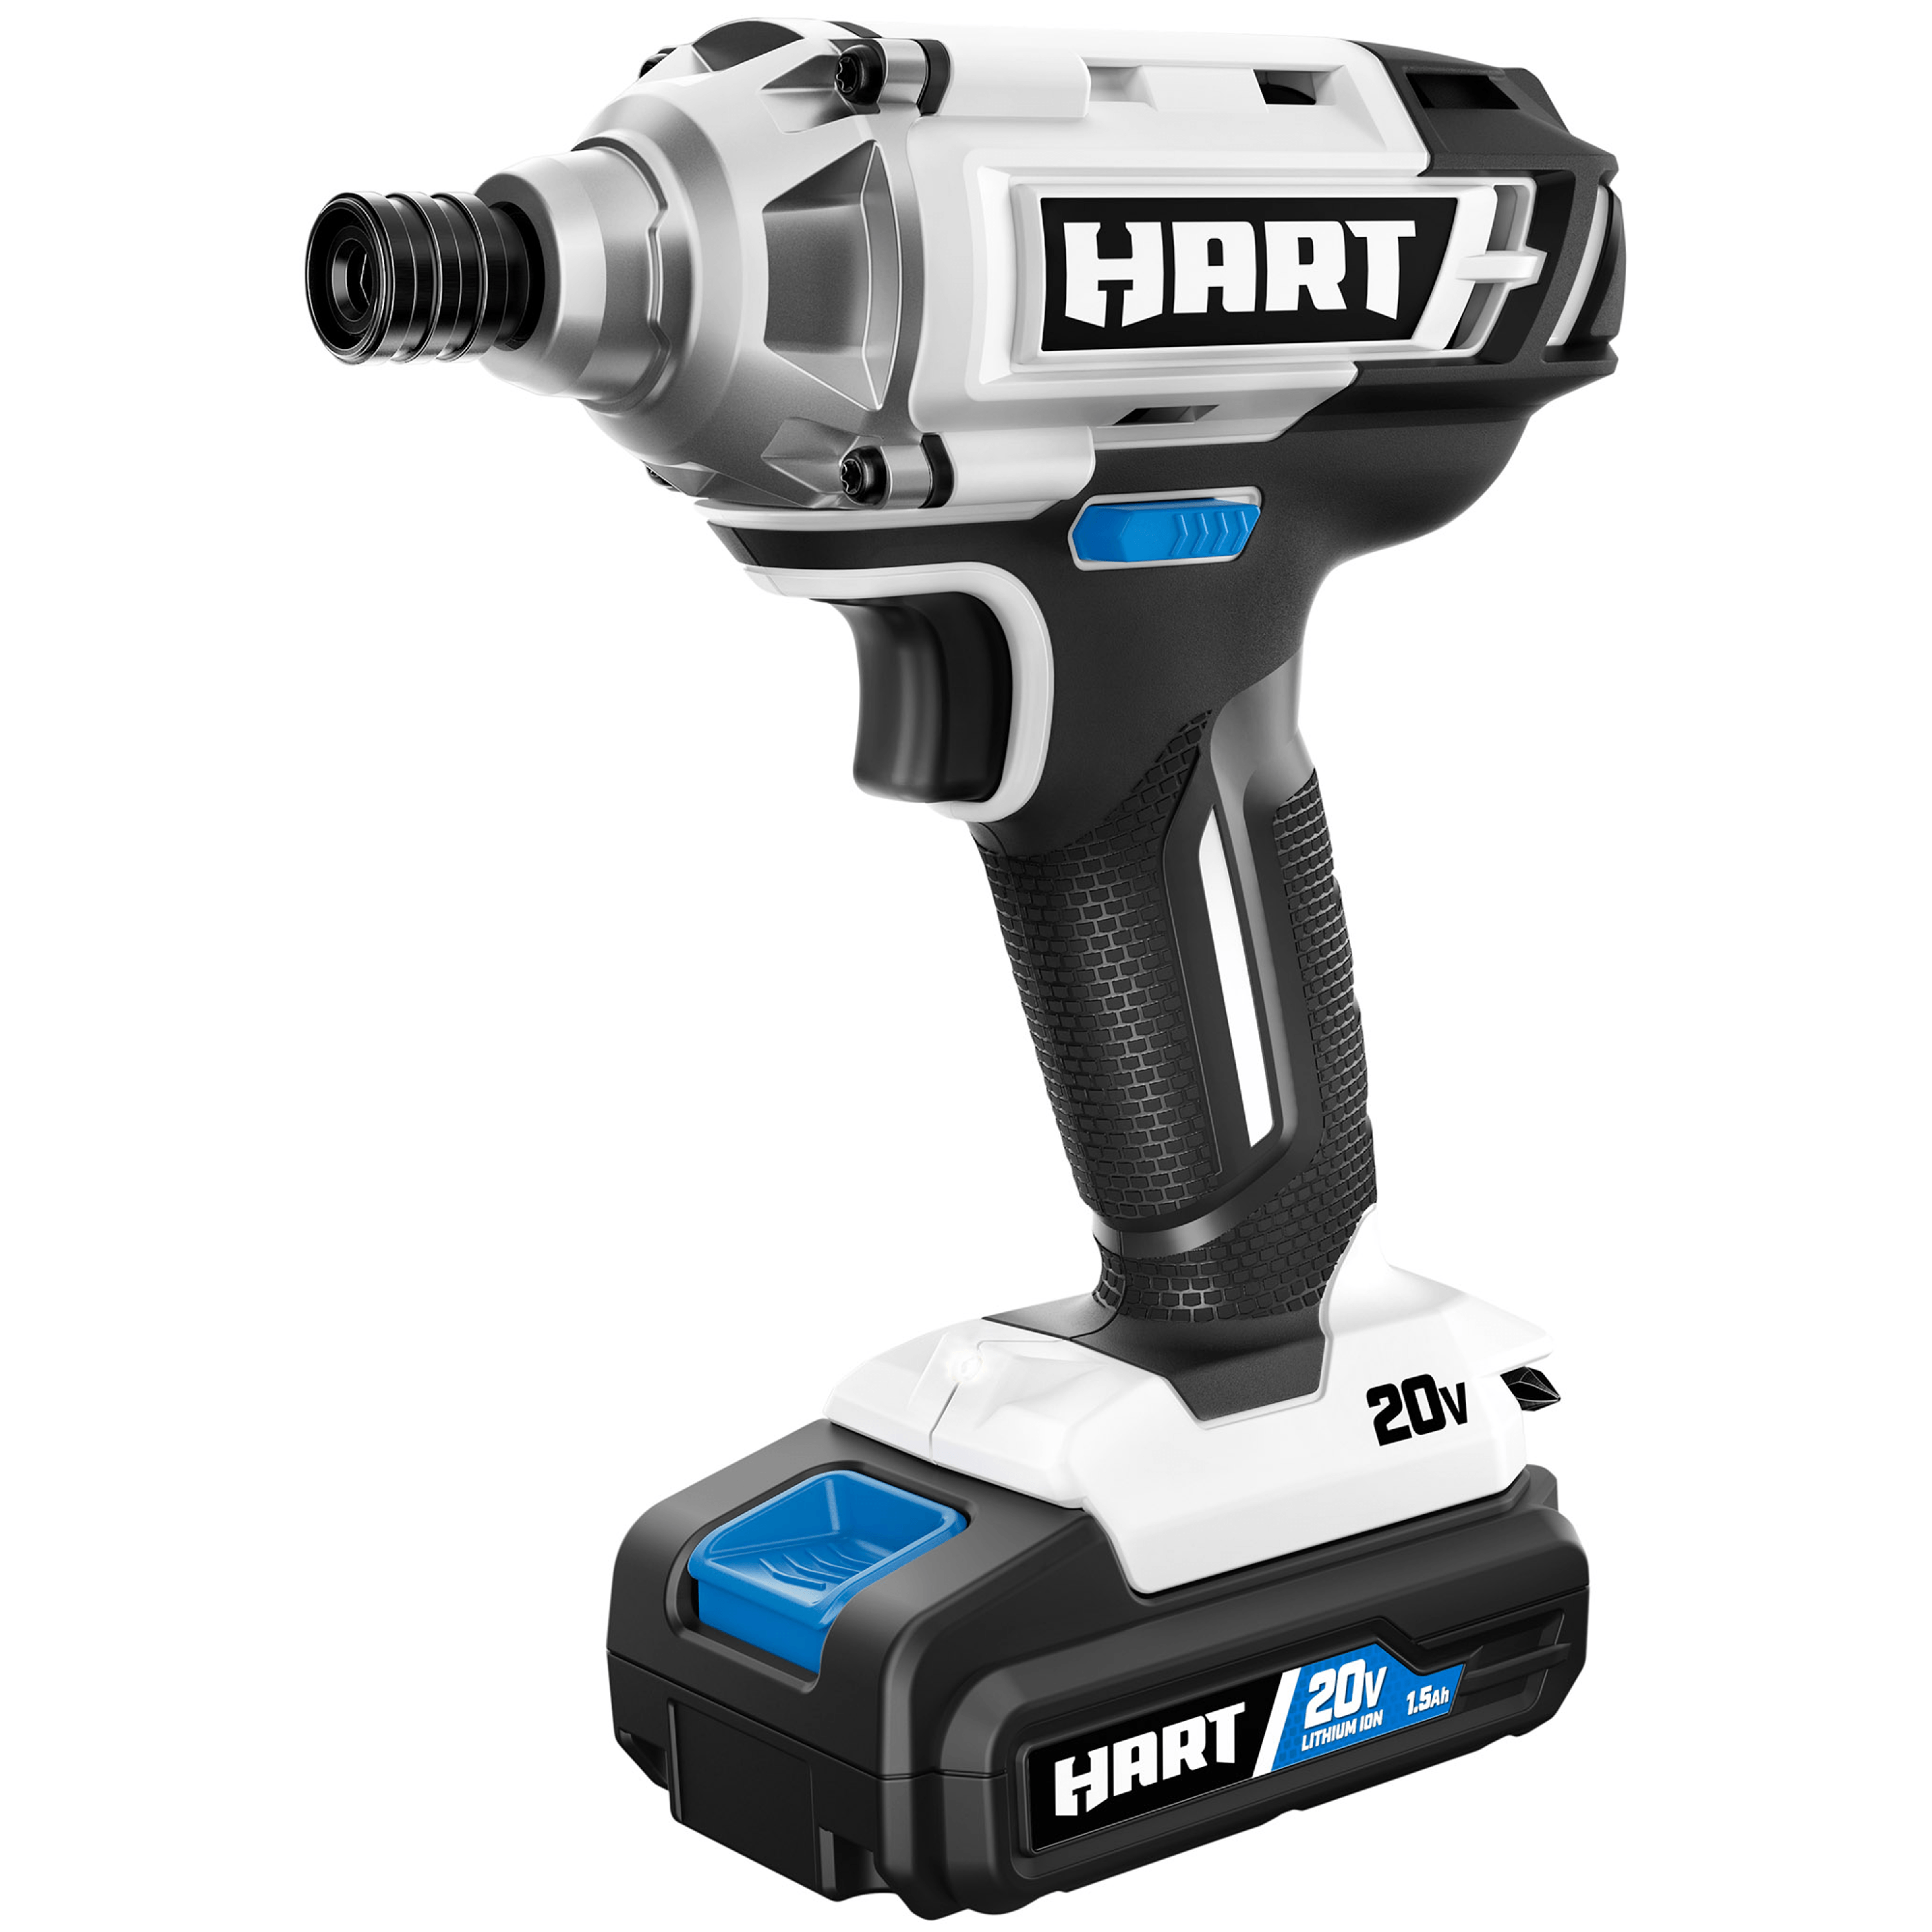 HART 20-Volt Impact Driver Kit with FREE Accessory - image 2 of 3